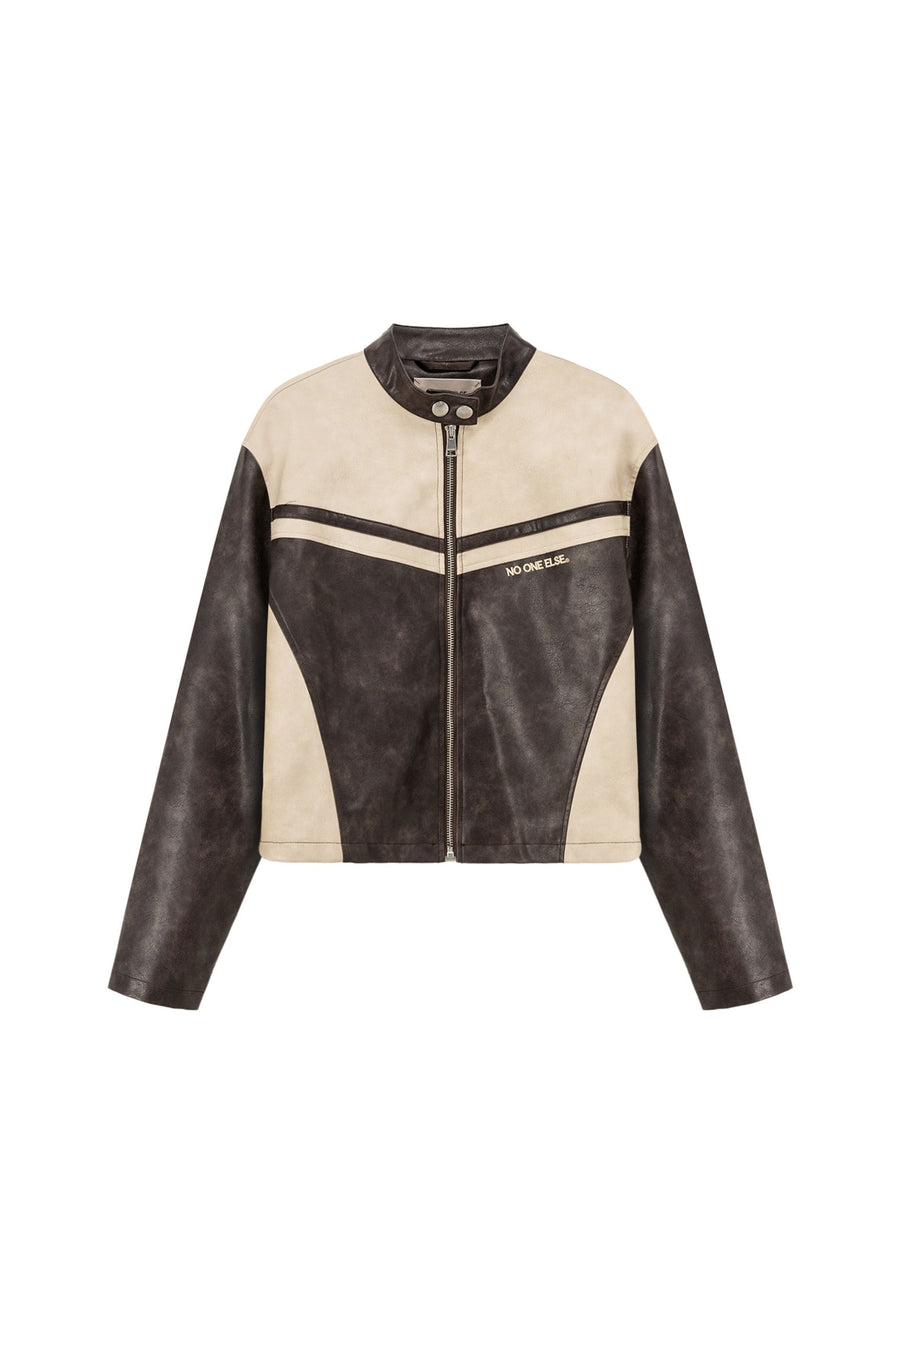 Color Combination Leather Jacket